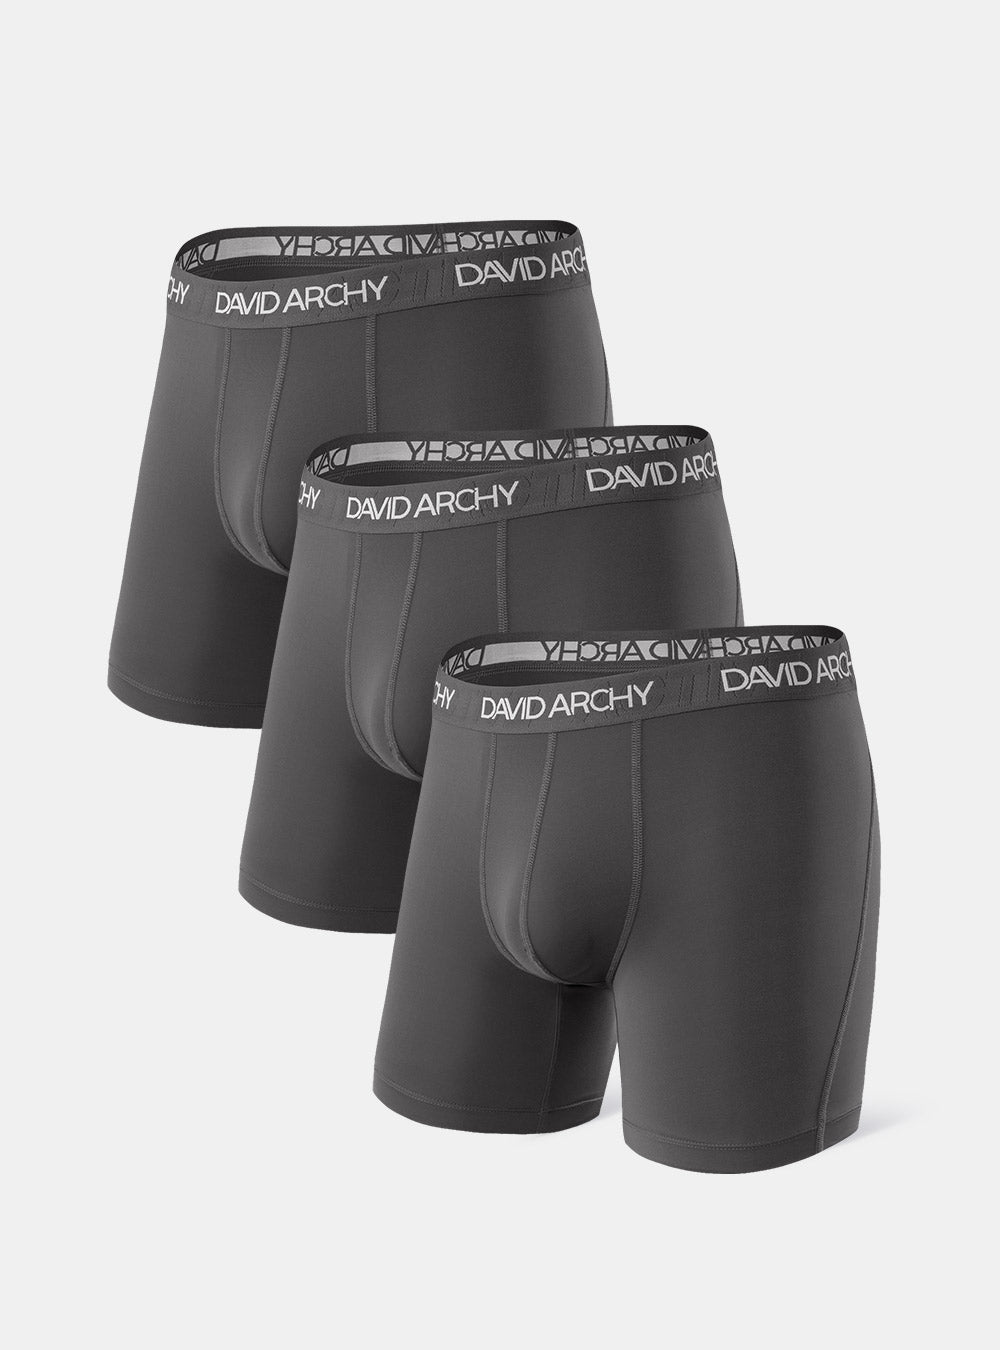 4 Packs Bamboo Rayon Trunks Dual Pouch Smooth David Archy Ultra